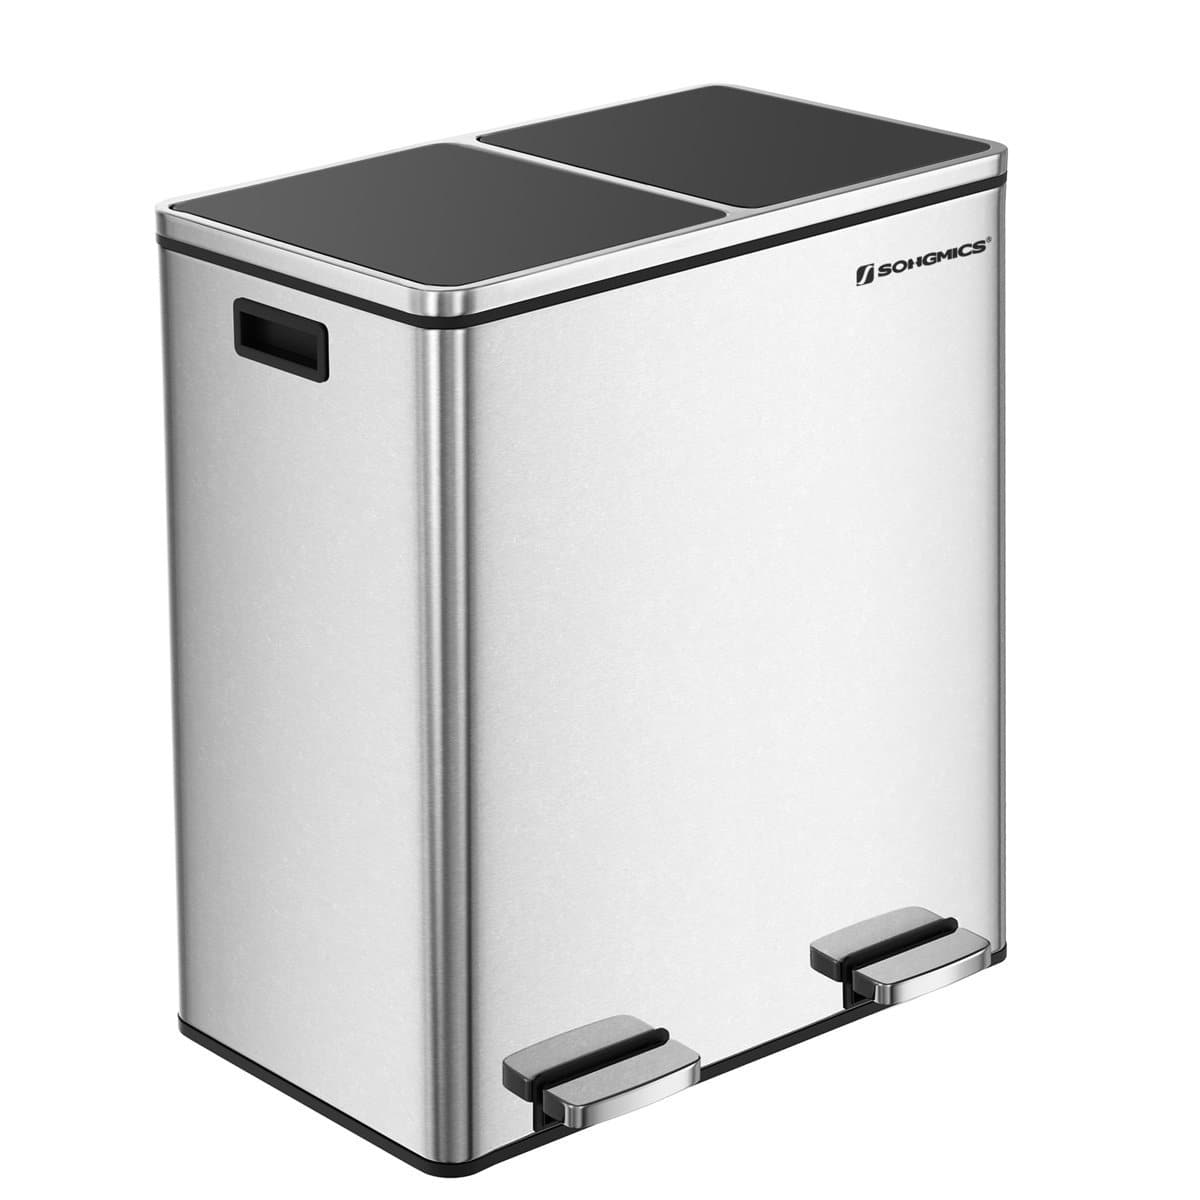 Nancy's XL Metal Duo Trash Can - 2 Compartments Waste Separation - 2x30 Liter Waste Separation Pedal Bin